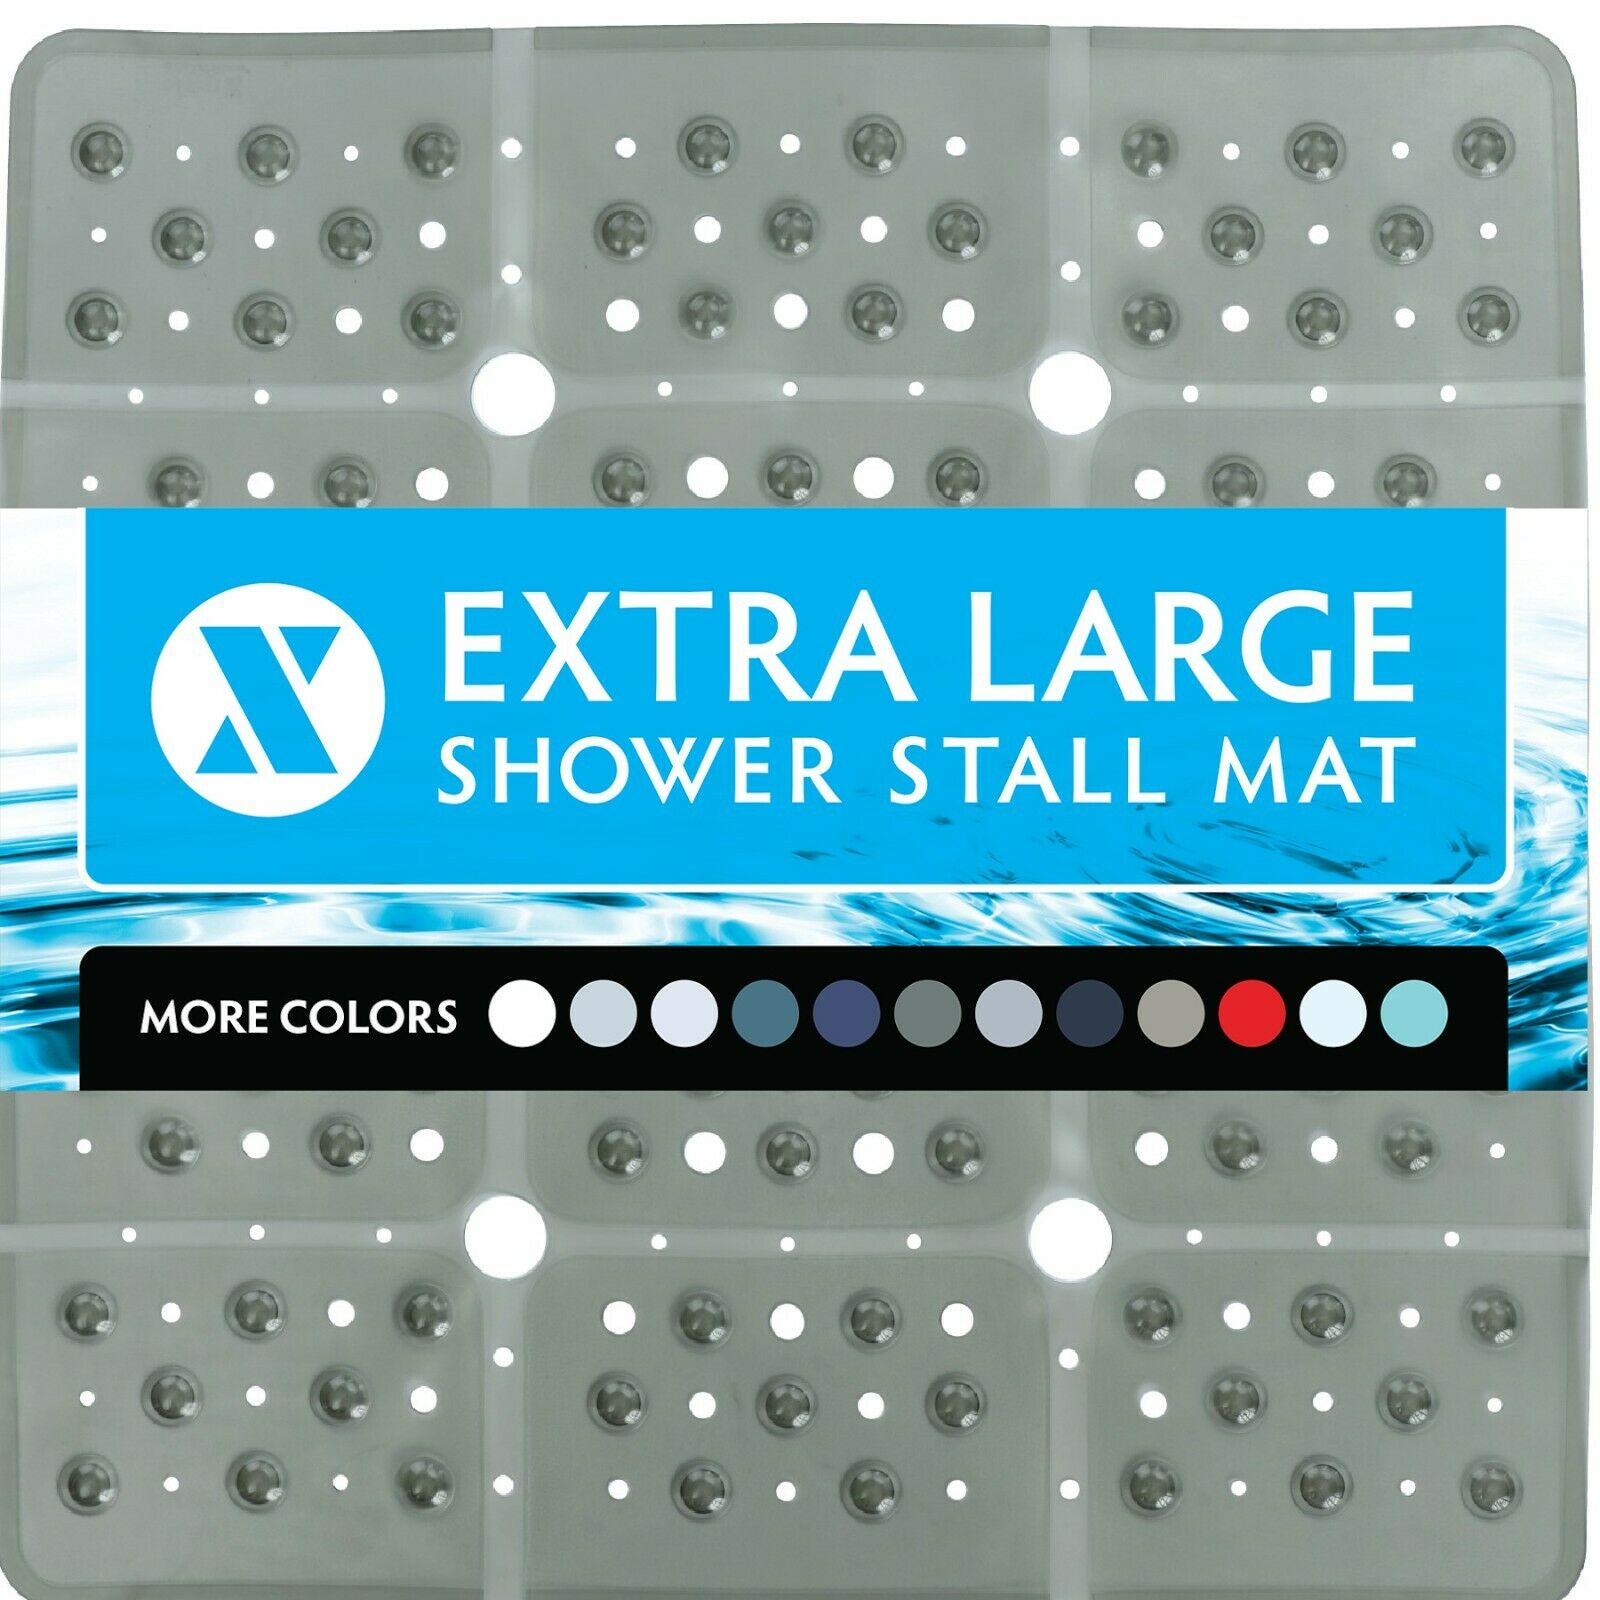 65% More Coverage! 27 Inch Extra Large Square Anti-slip Shower Safety Mat